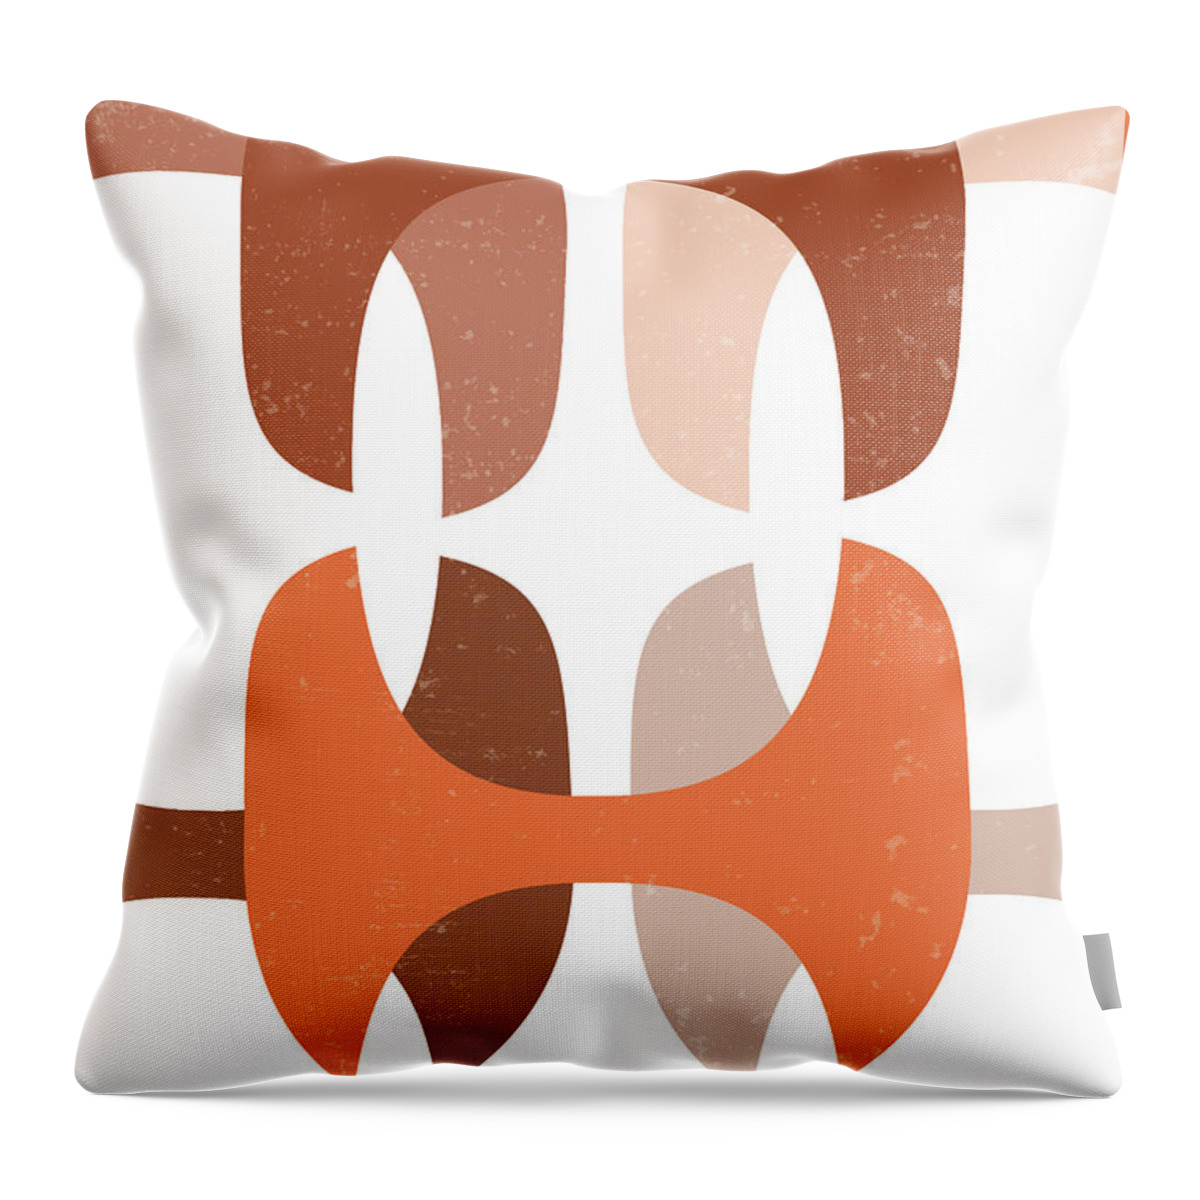 Terracotta Throw Pillow featuring the mixed media Terracotta Abstract 27 - Modern, Contemporary Art - Abstract Organic Shapes - Brown, Burnt Orange by Studio Grafiikka